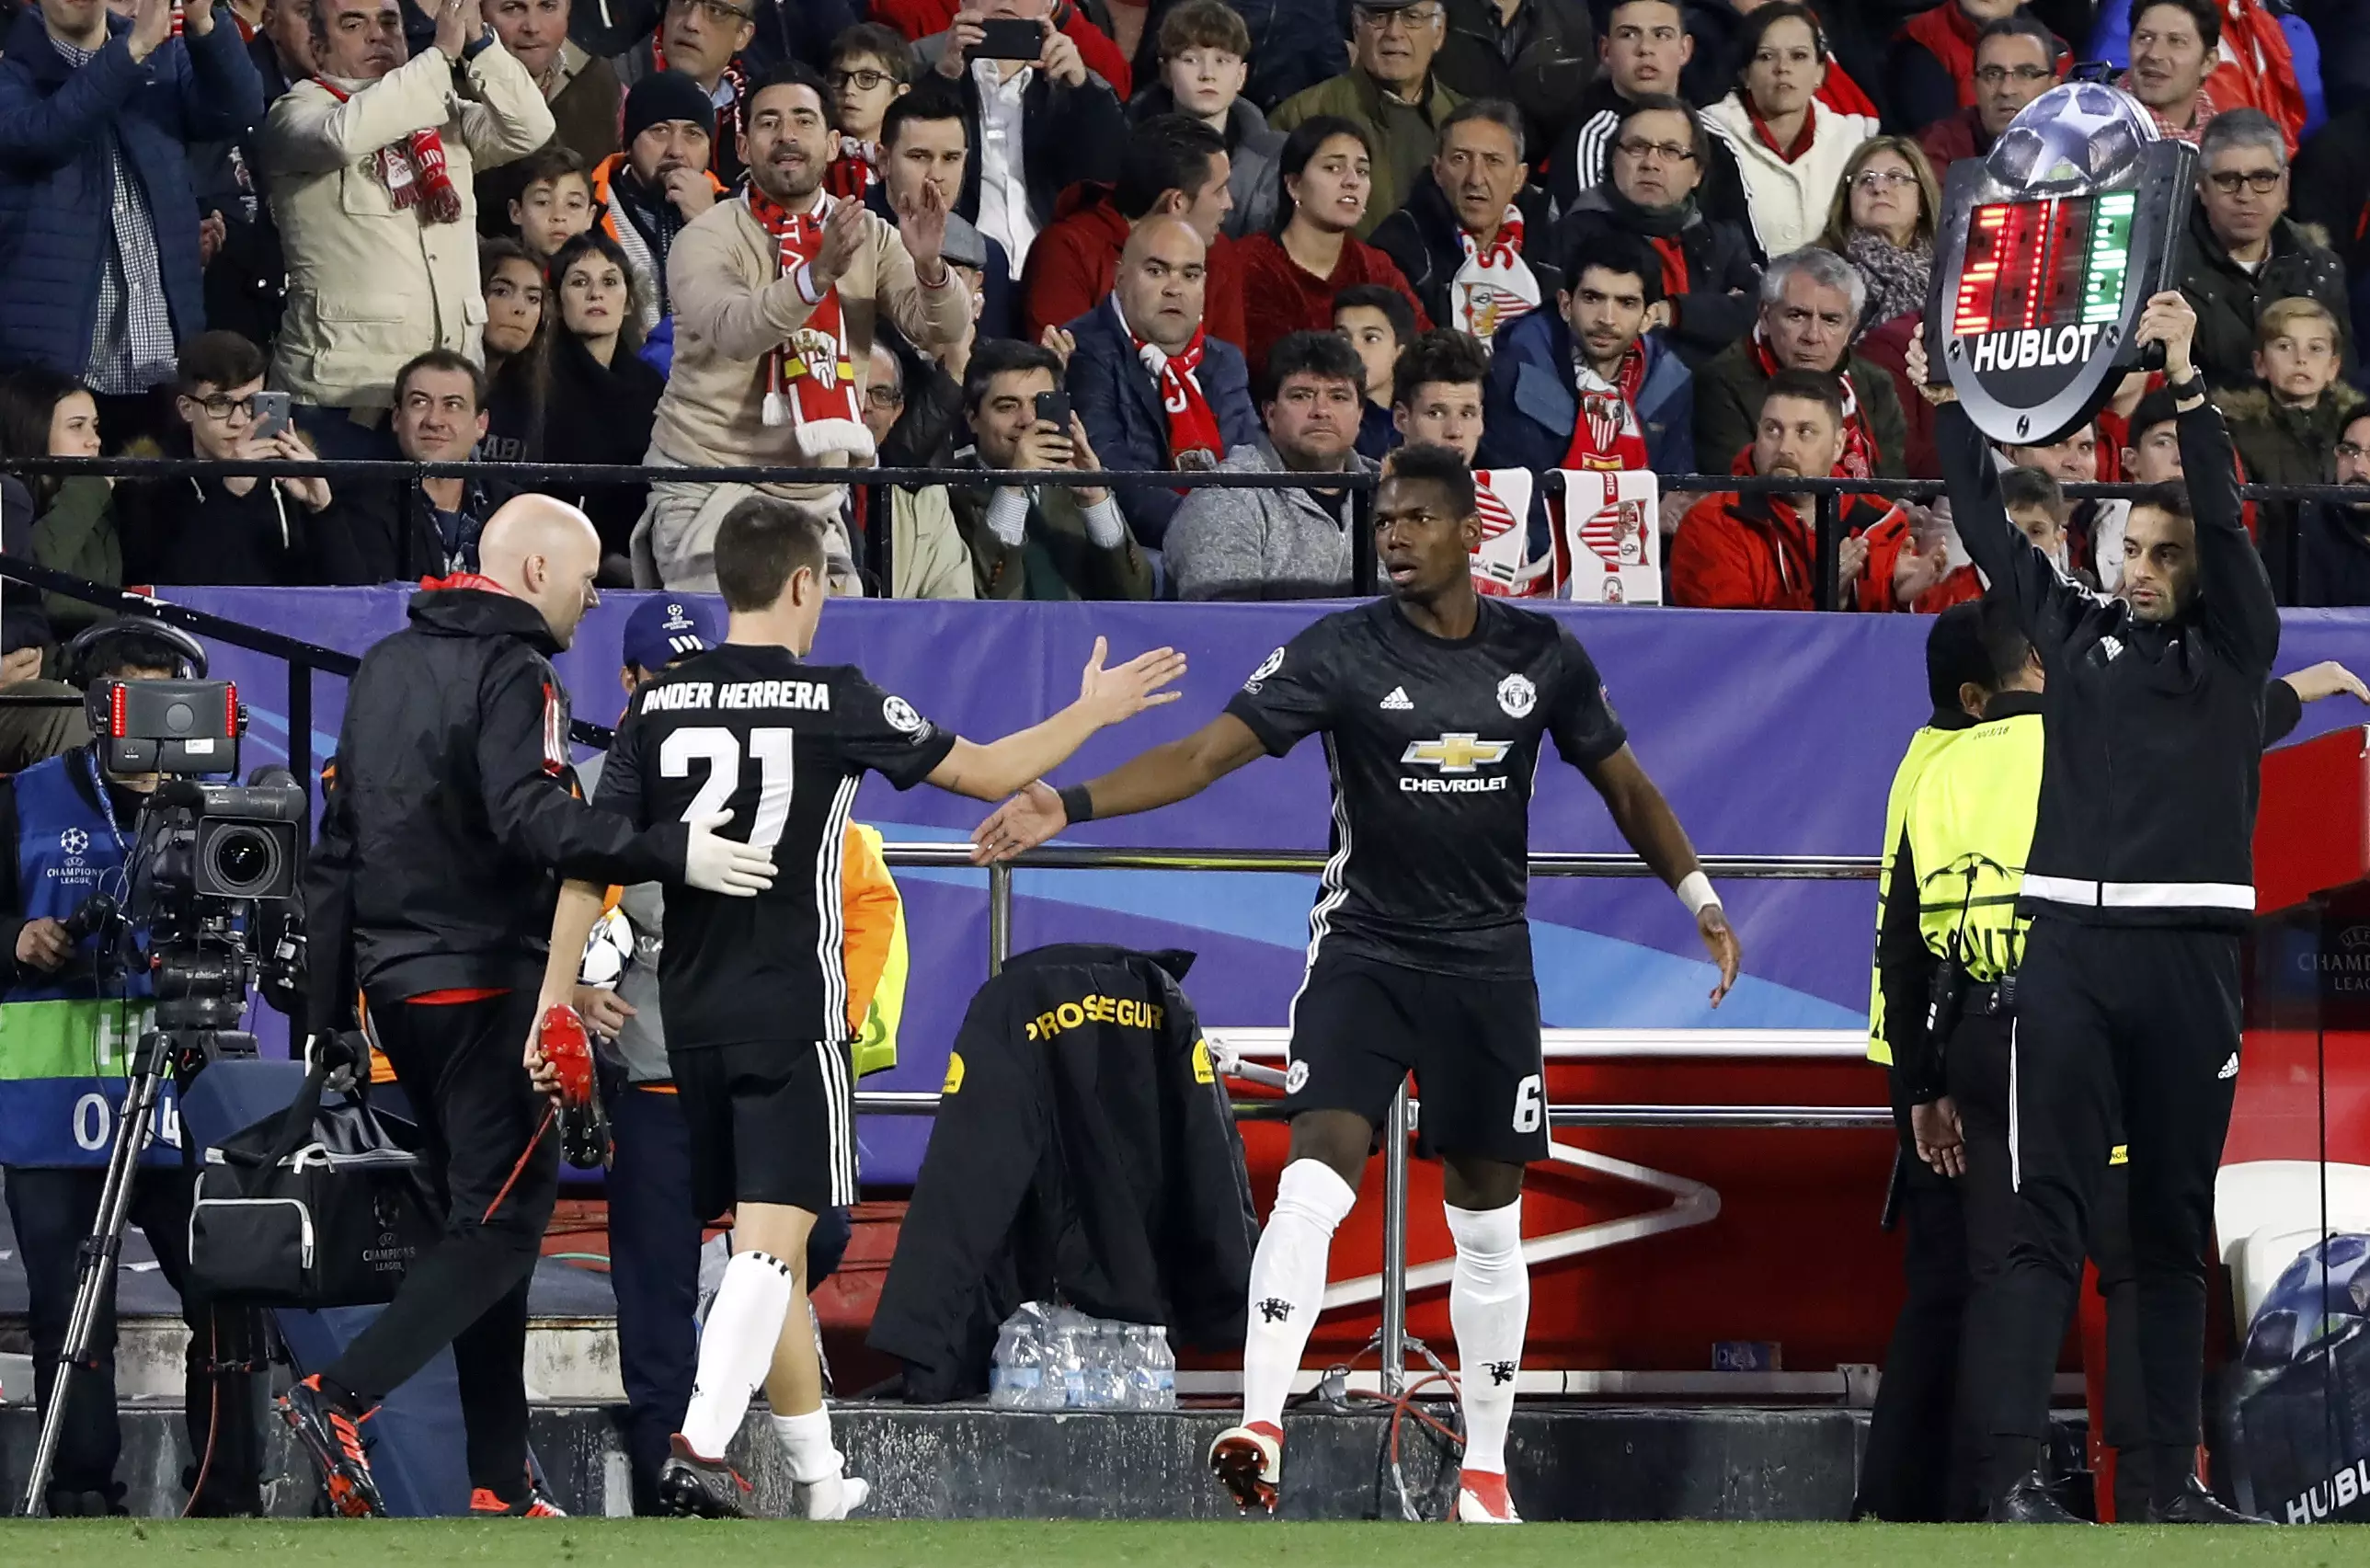 Pogba makes his entrance after just 16 minutes. Image: PA Images.